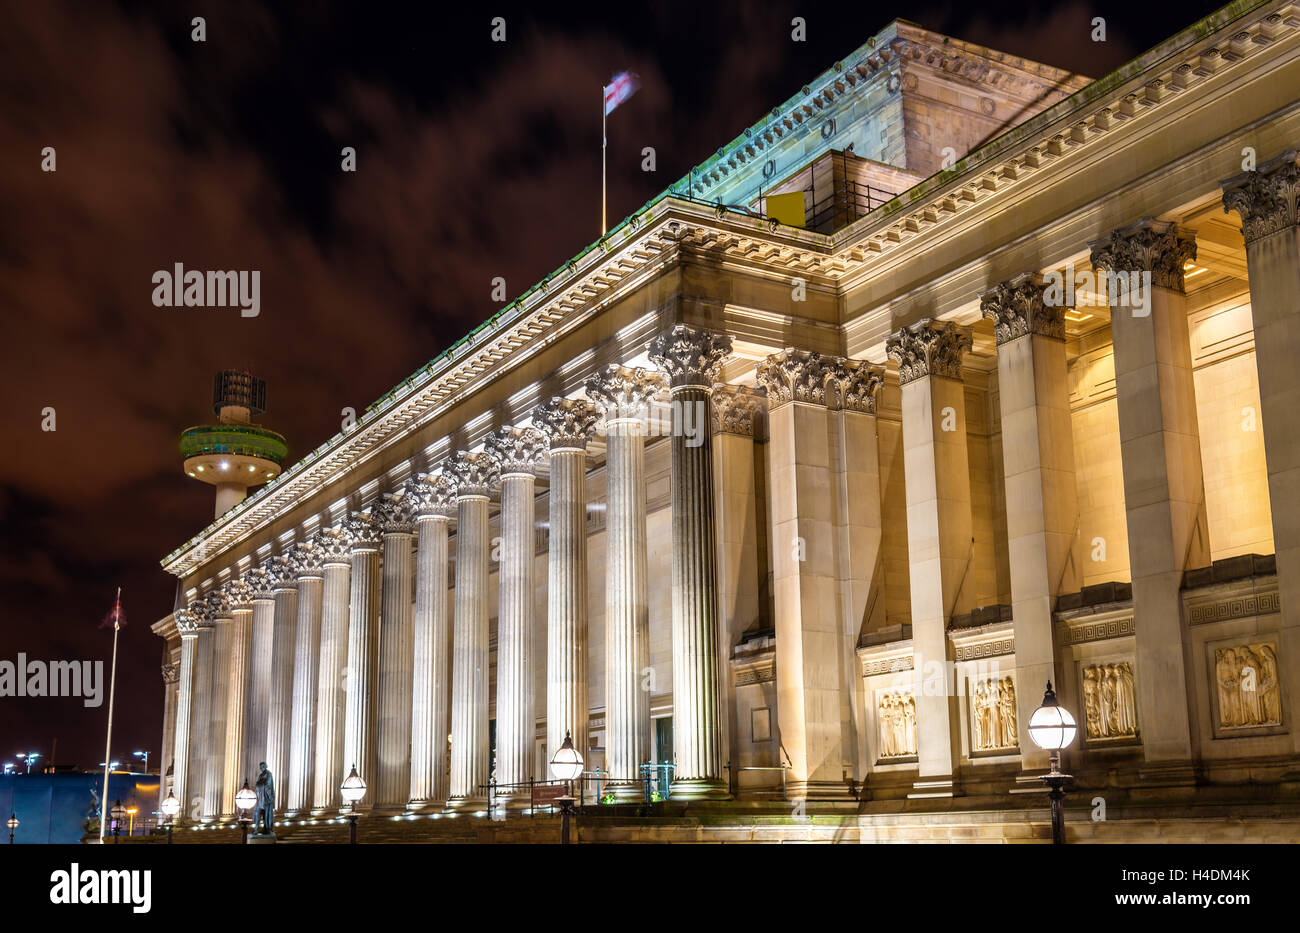 St George's Hall à Liverpool - Angleterre Banque D'Images